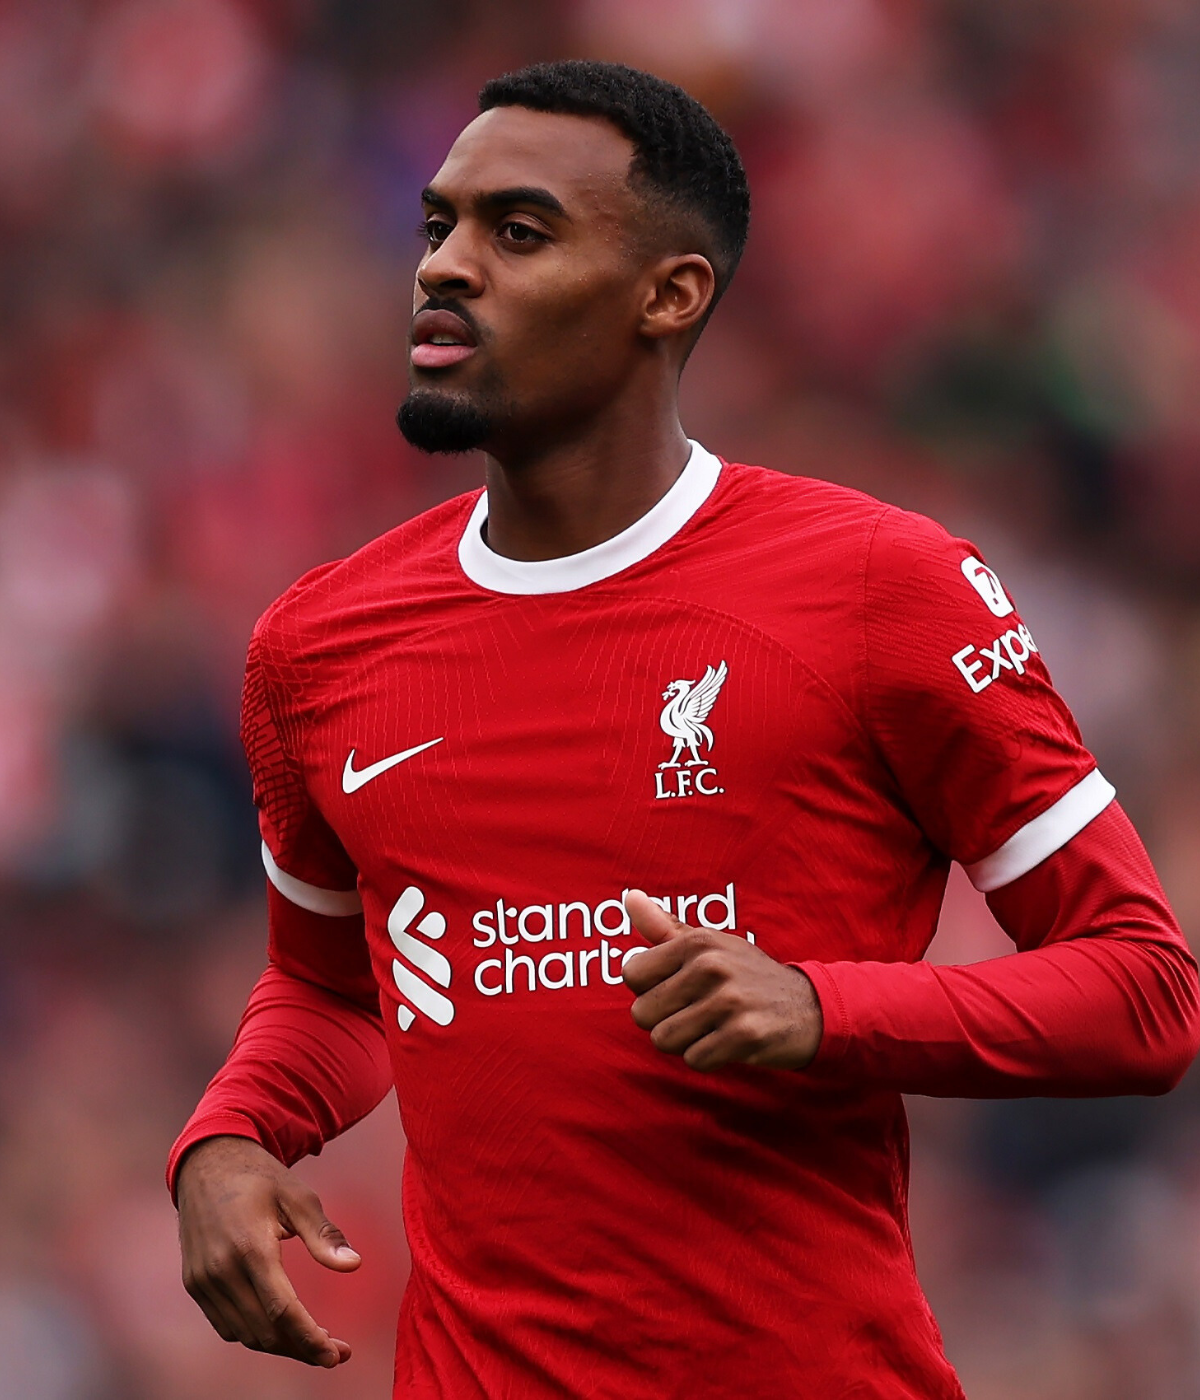 "Who he likes and who he doesn’t": £34M Liverpool star could be sold if Slot doesn't rate him